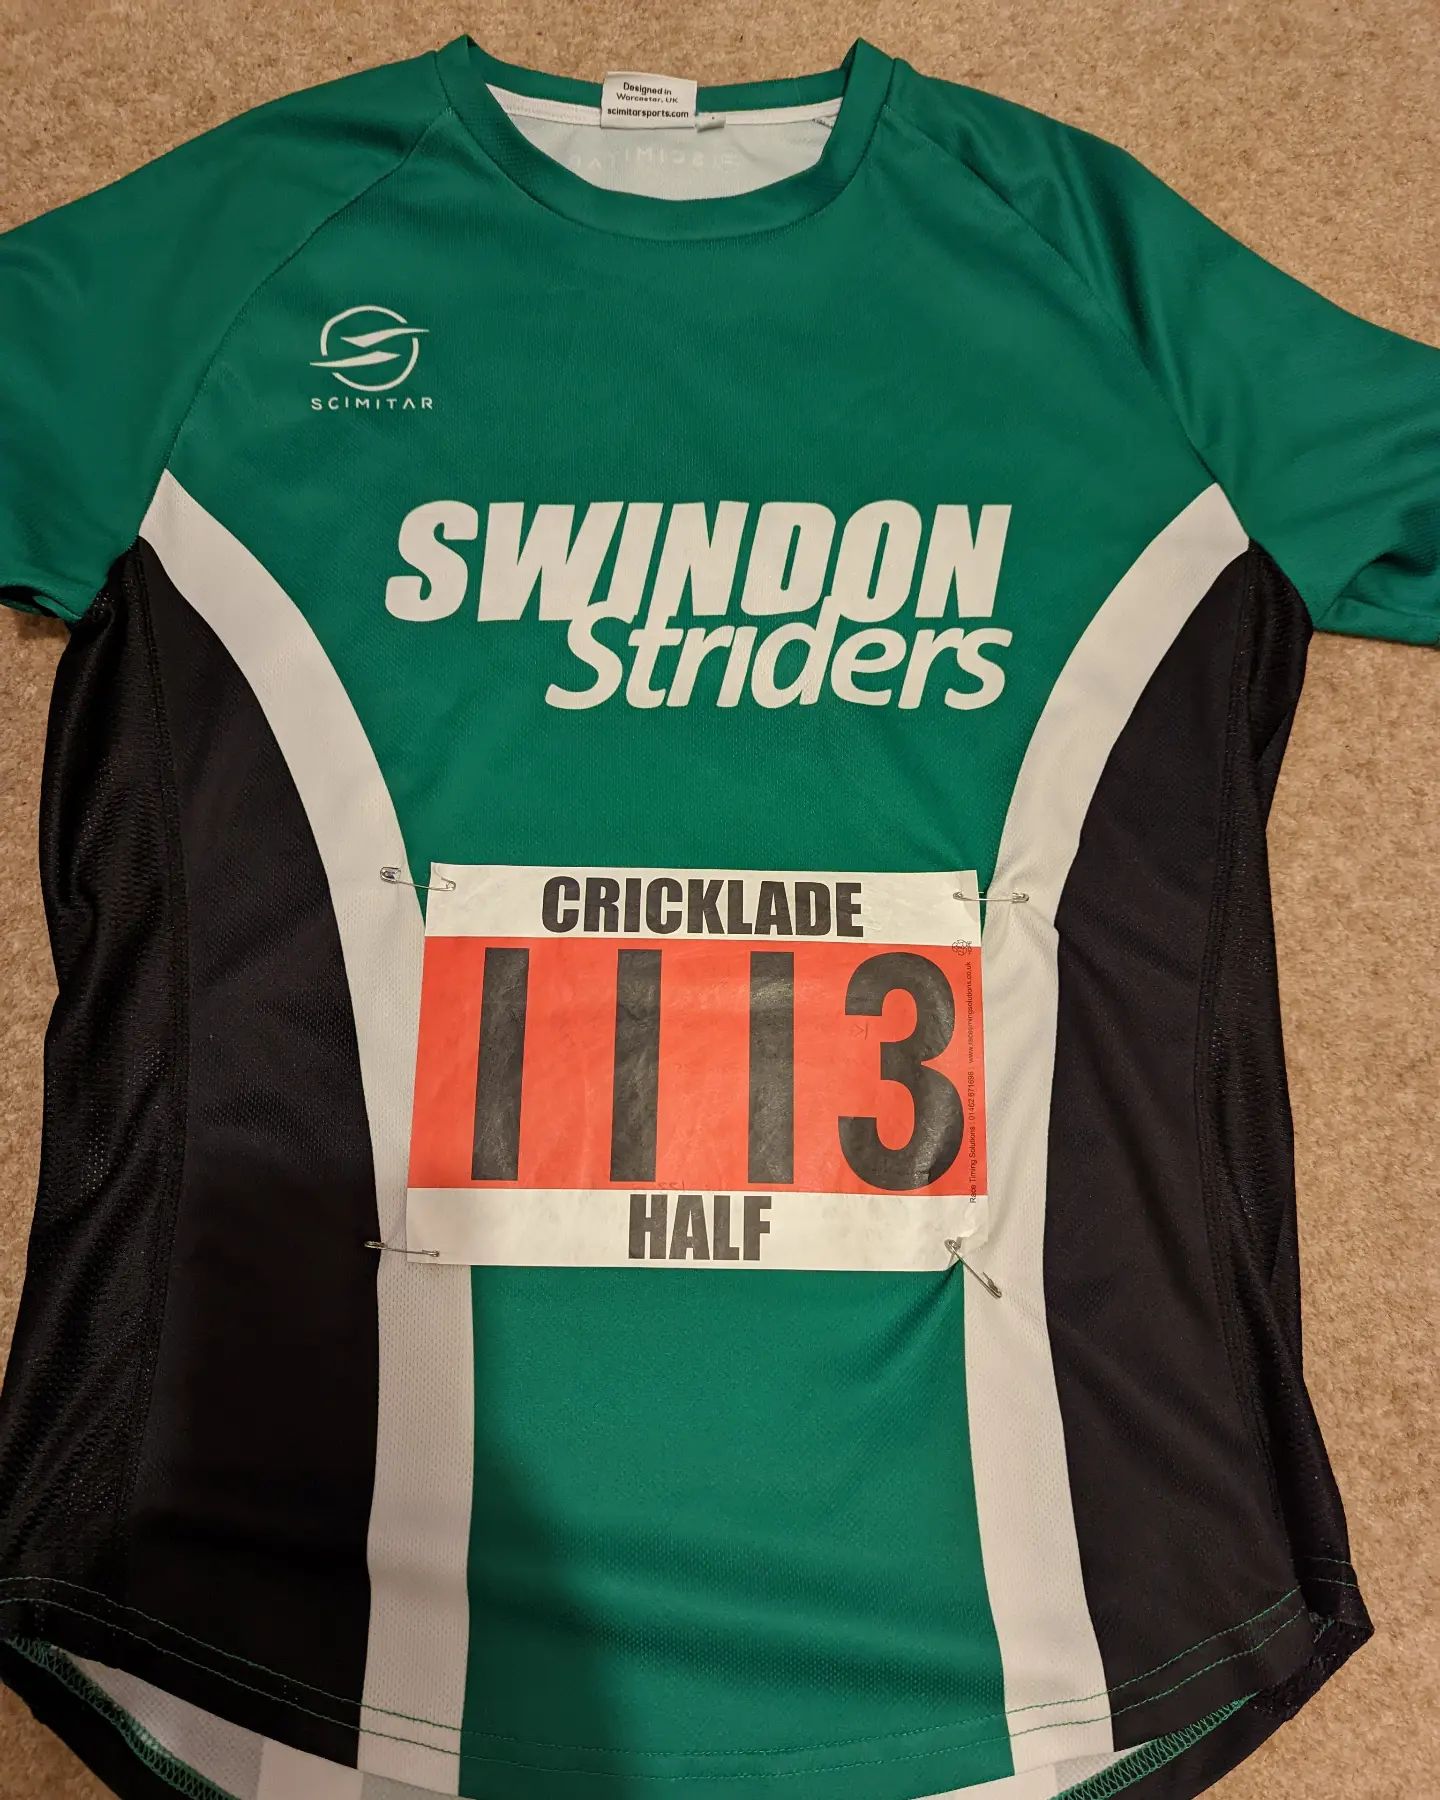 Cricklade Half Marathon tomorrow!Hard to believe it's over 3 years since my last official half marathon, of course there were a couple of virtual ones but it's simply not the same is it?I'm hoping for better weather tomorrow than last time and I'm not prepping for this one with four pints, my sister's wedding and a dancefloor but instead choosing to watch the Strictly dancefloor!Good luck to those heading out around London tomorrow, I'll be thinking of you as I plod around ( @chrispriddy and @freckles.runs.the.marathon that I know of!).#running #runnersofinstagram #runningcommunity #runningclub #run #clubrun  #runningmotivation @swindonstriders  #londonmarathon #halfmarathon #cricklade #virtualrace #flatlay #raceday #raceprep